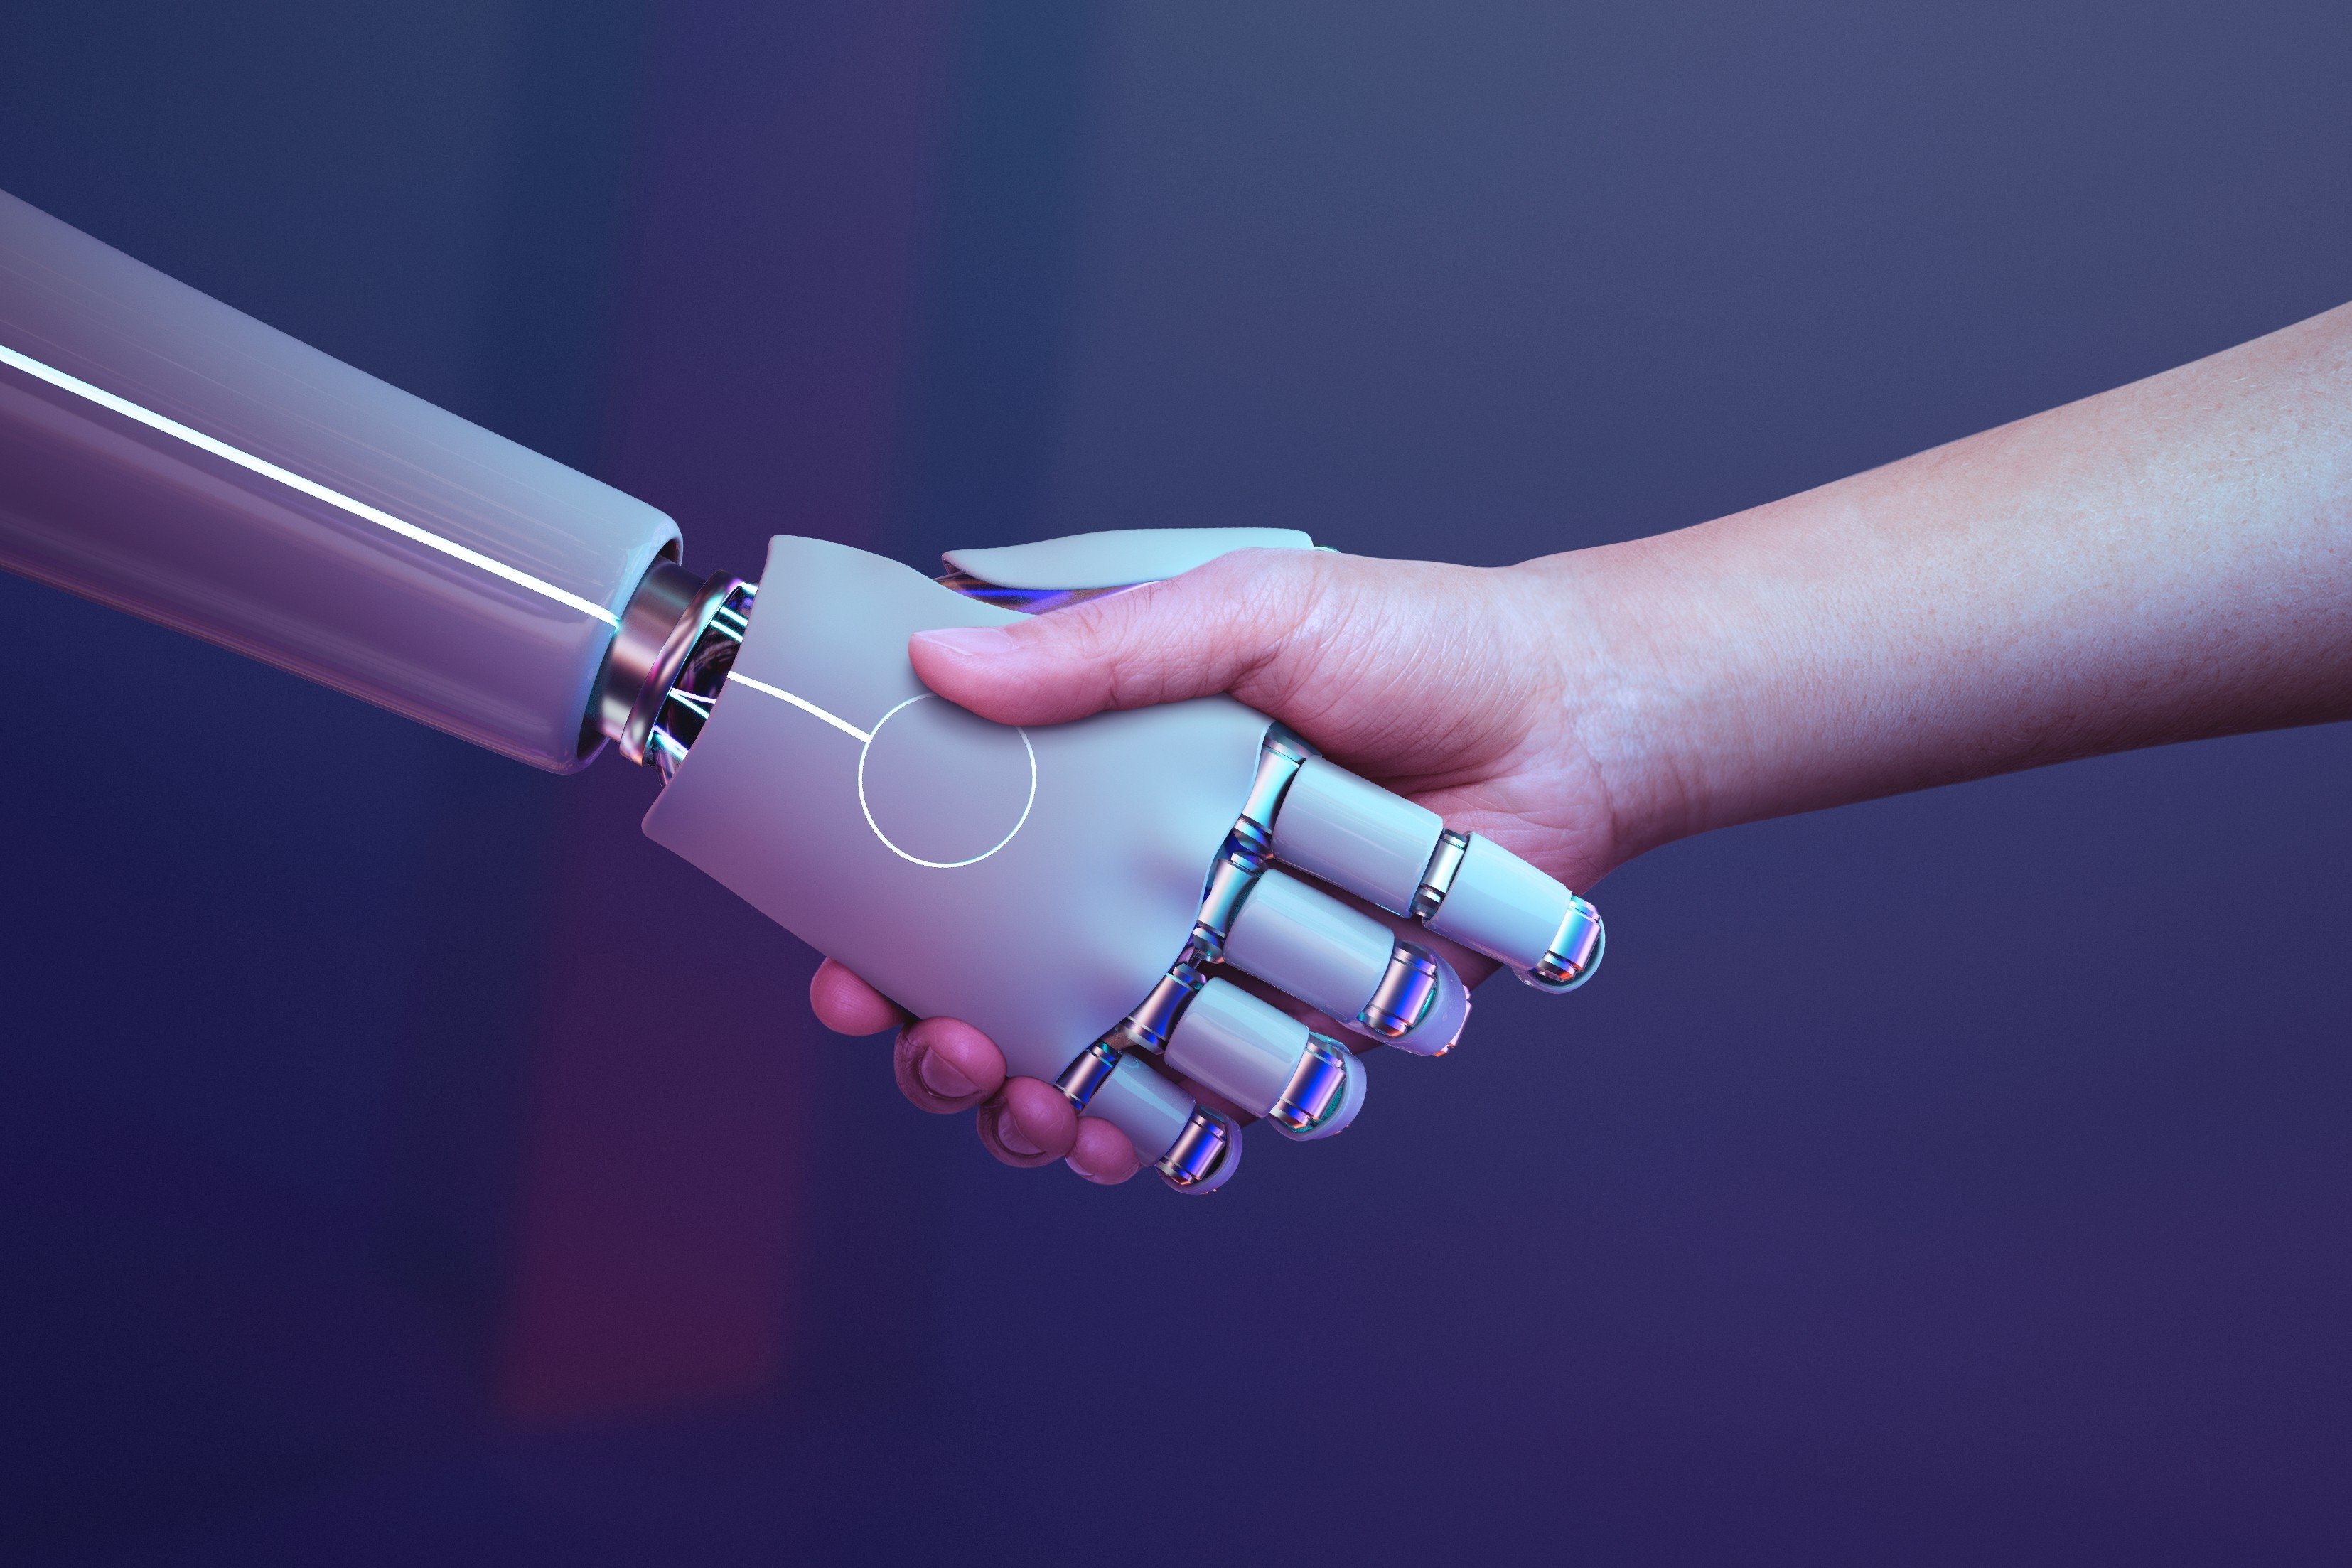 The future of work will see humans and AI collaborating hand-in-hand. Photo: Shutterstock